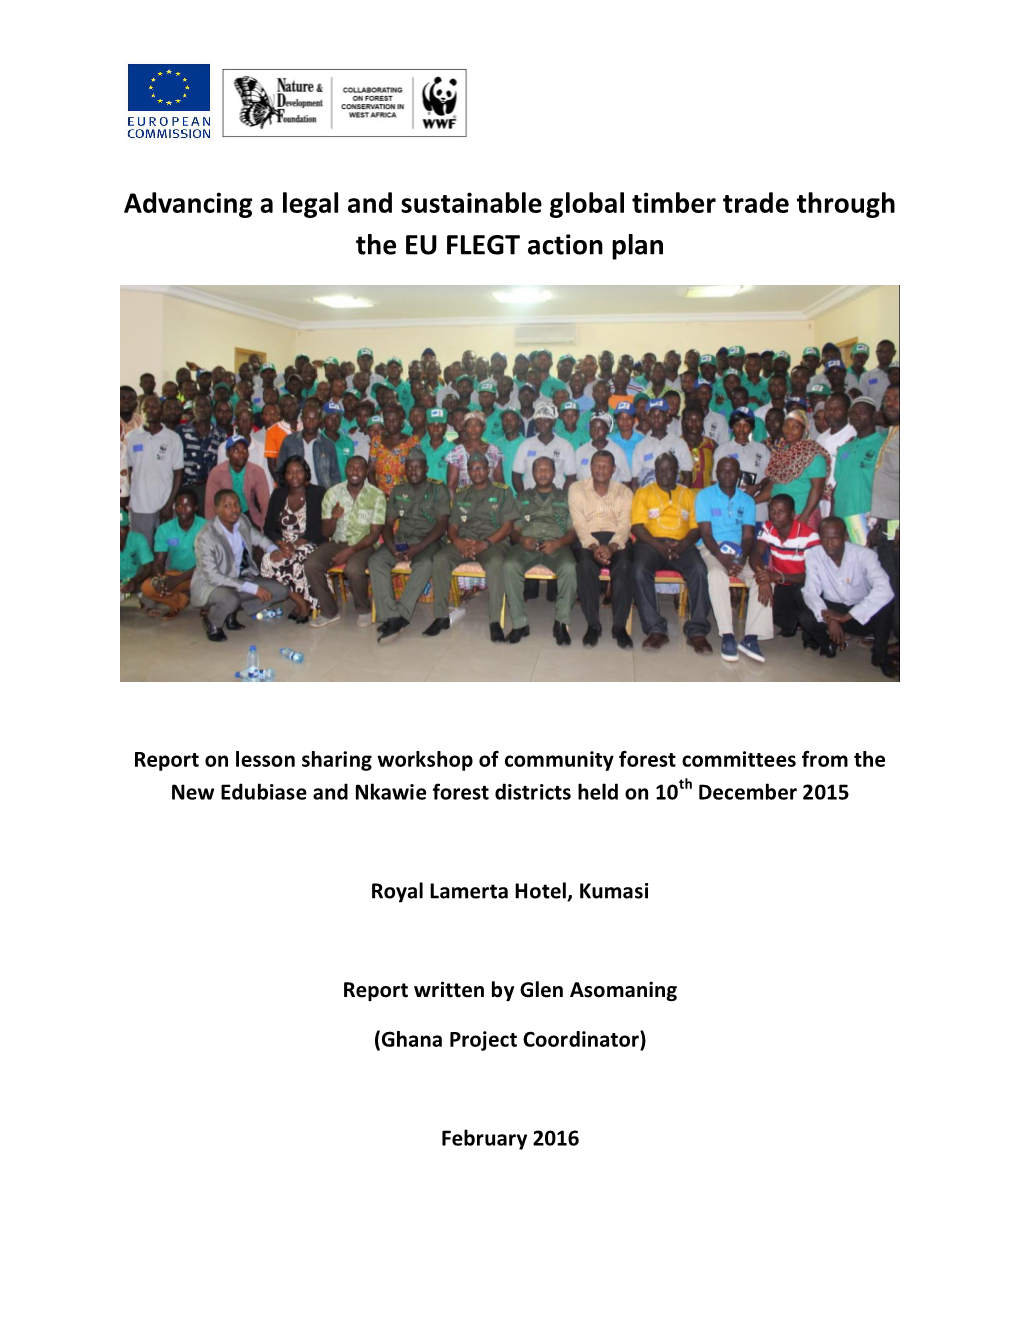 Advancing a Legal and Sustainable Global Timber Trade Through the EU FLEGT Action Plan